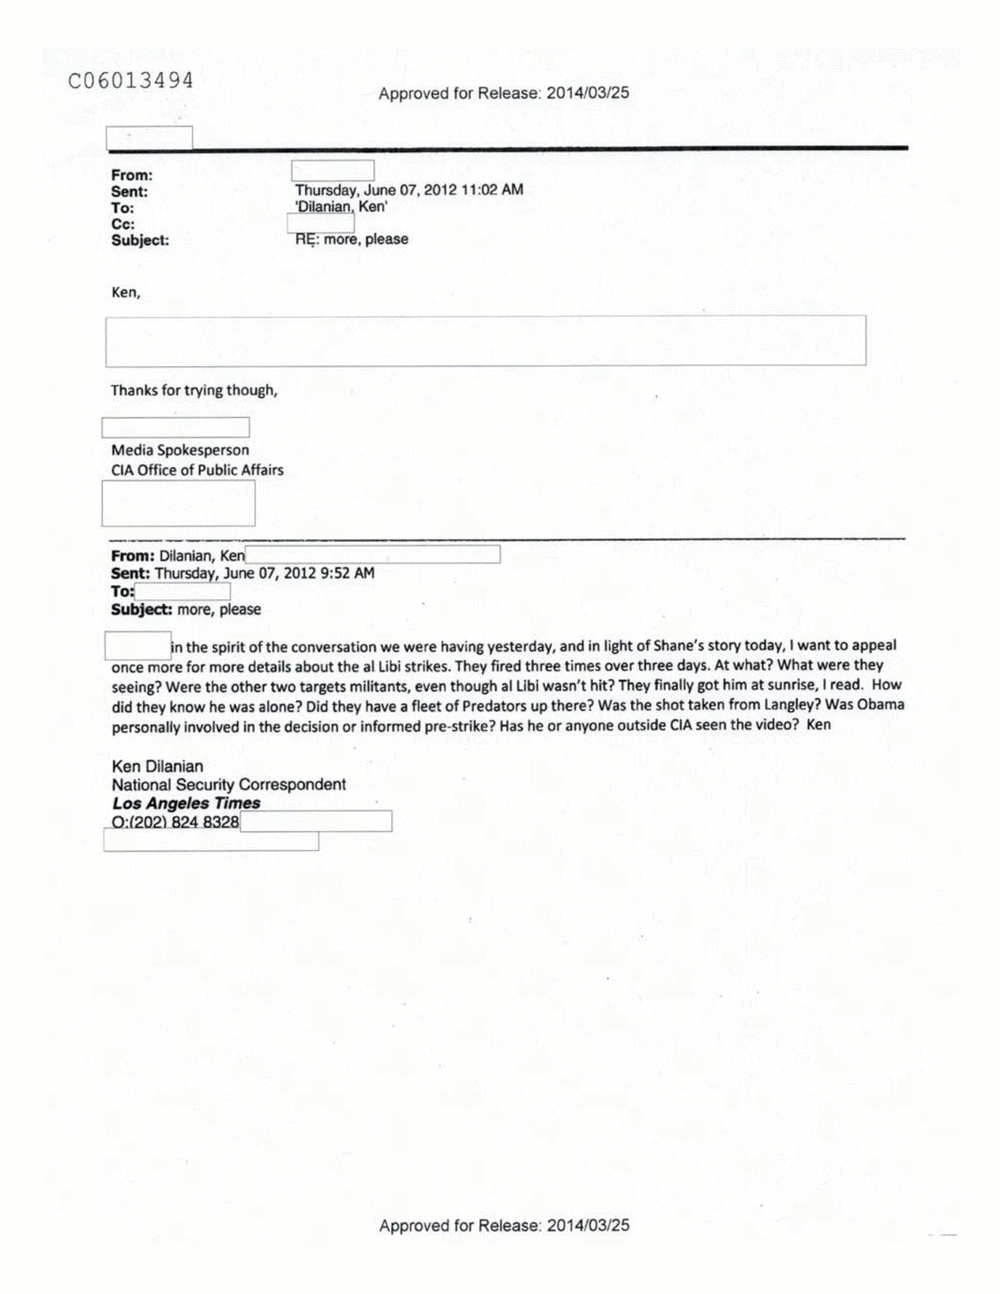 Page 345 from Email Correspondence Between Reporters and CIA Flacks